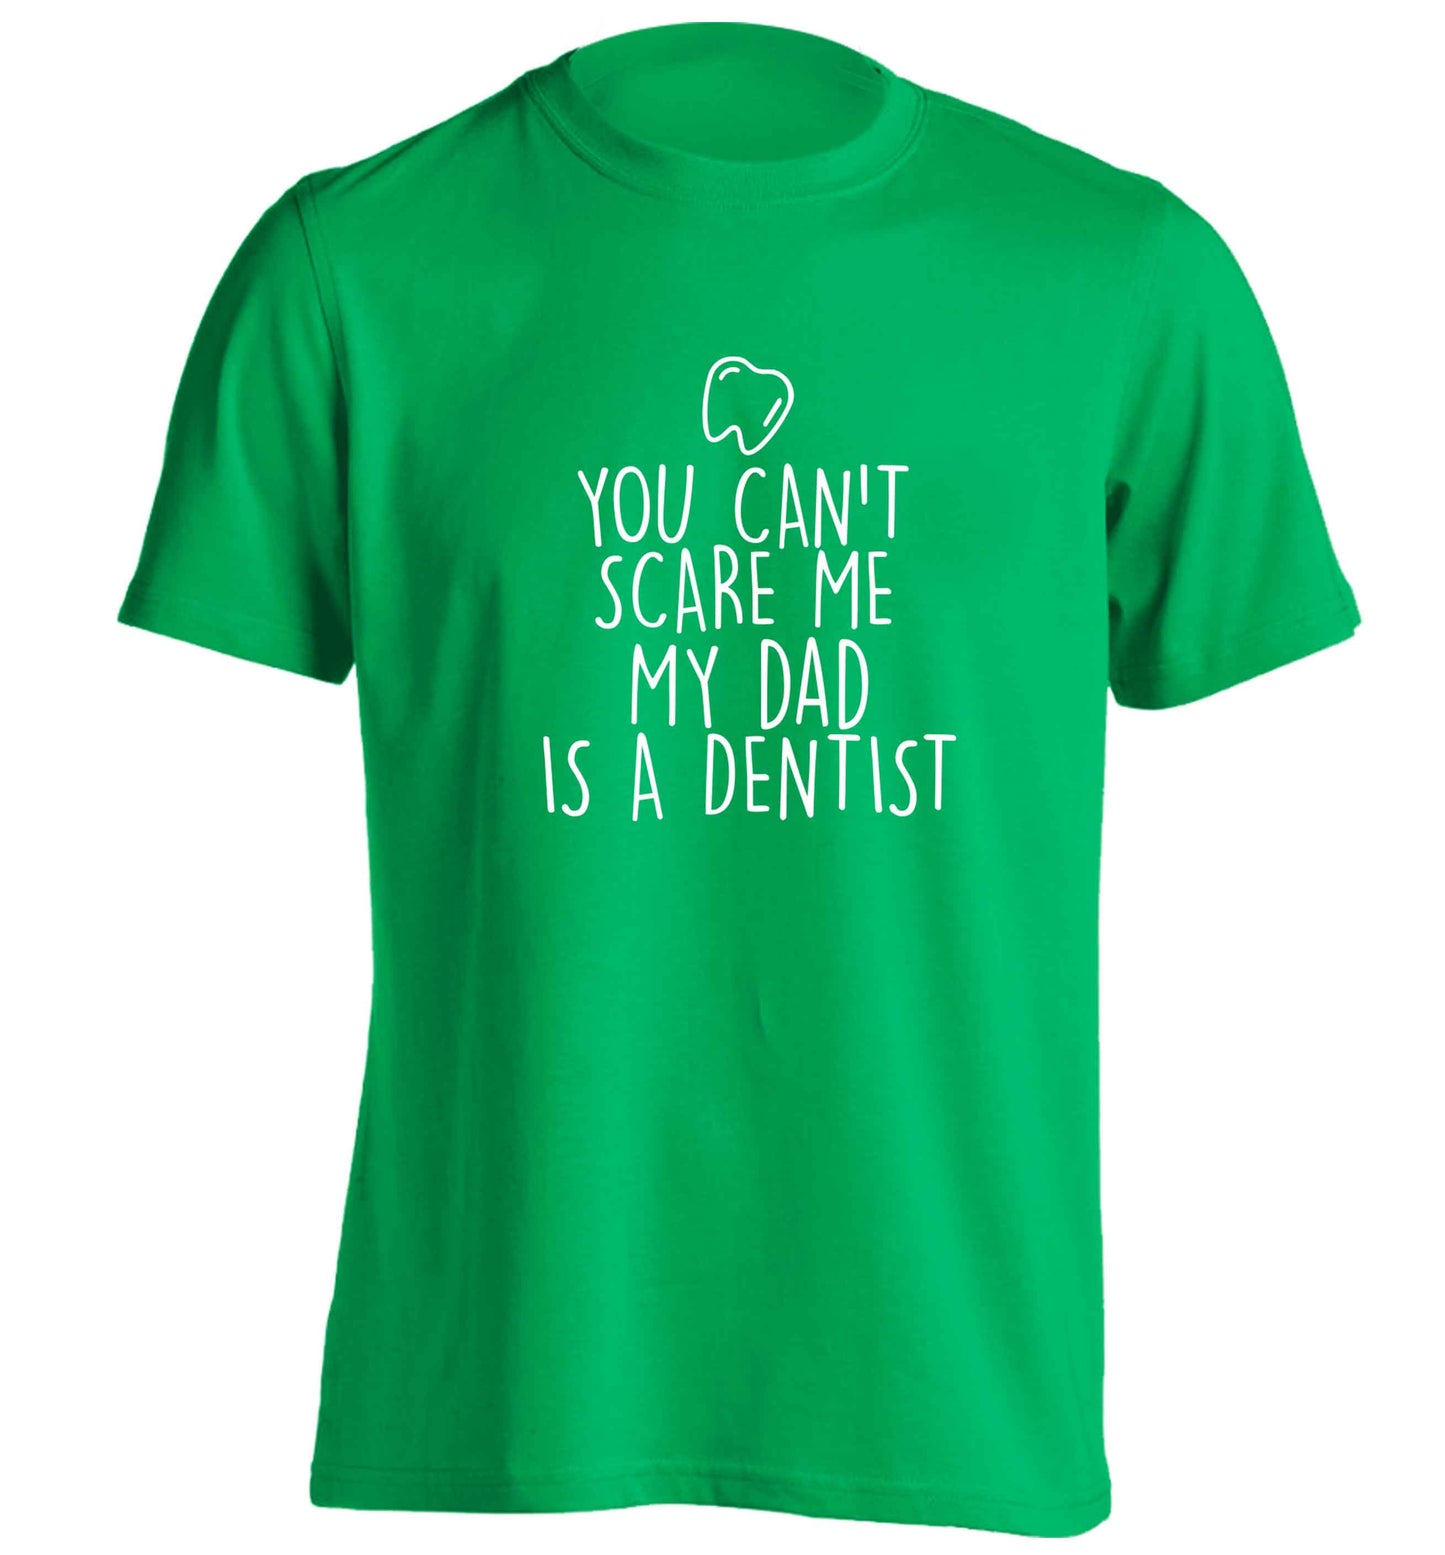 You can't scare me my dad is a dentist adults unisex green Tshirt 2XL